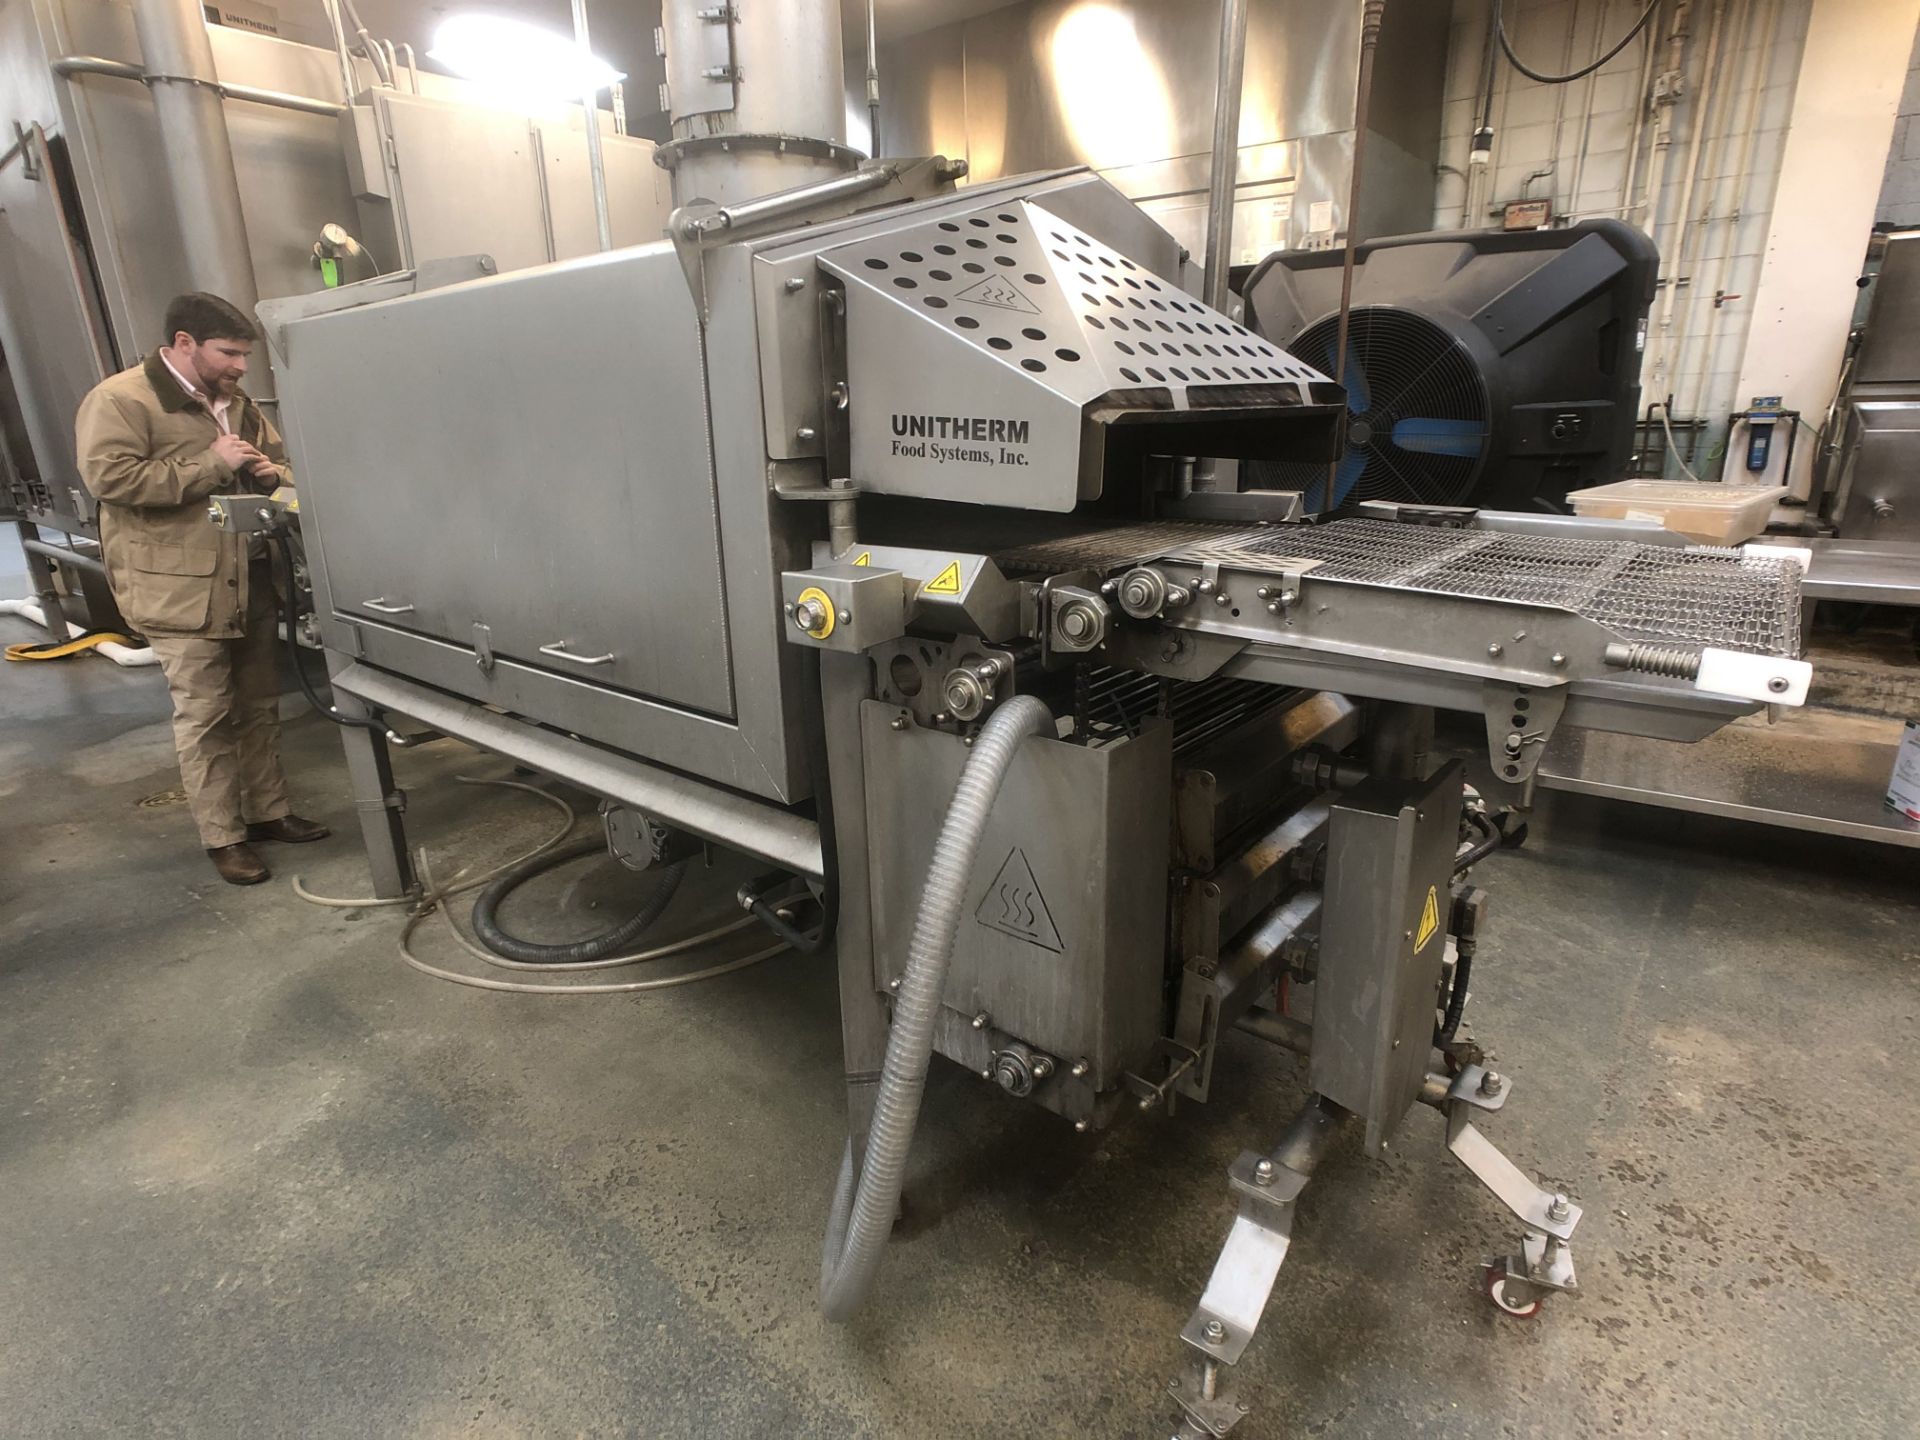 2019 Unitherm Food Systems 24" Flame Grill with Preheat, Model FG-24-8B-P, S/N FLGR-2485, Includes - Image 2 of 19